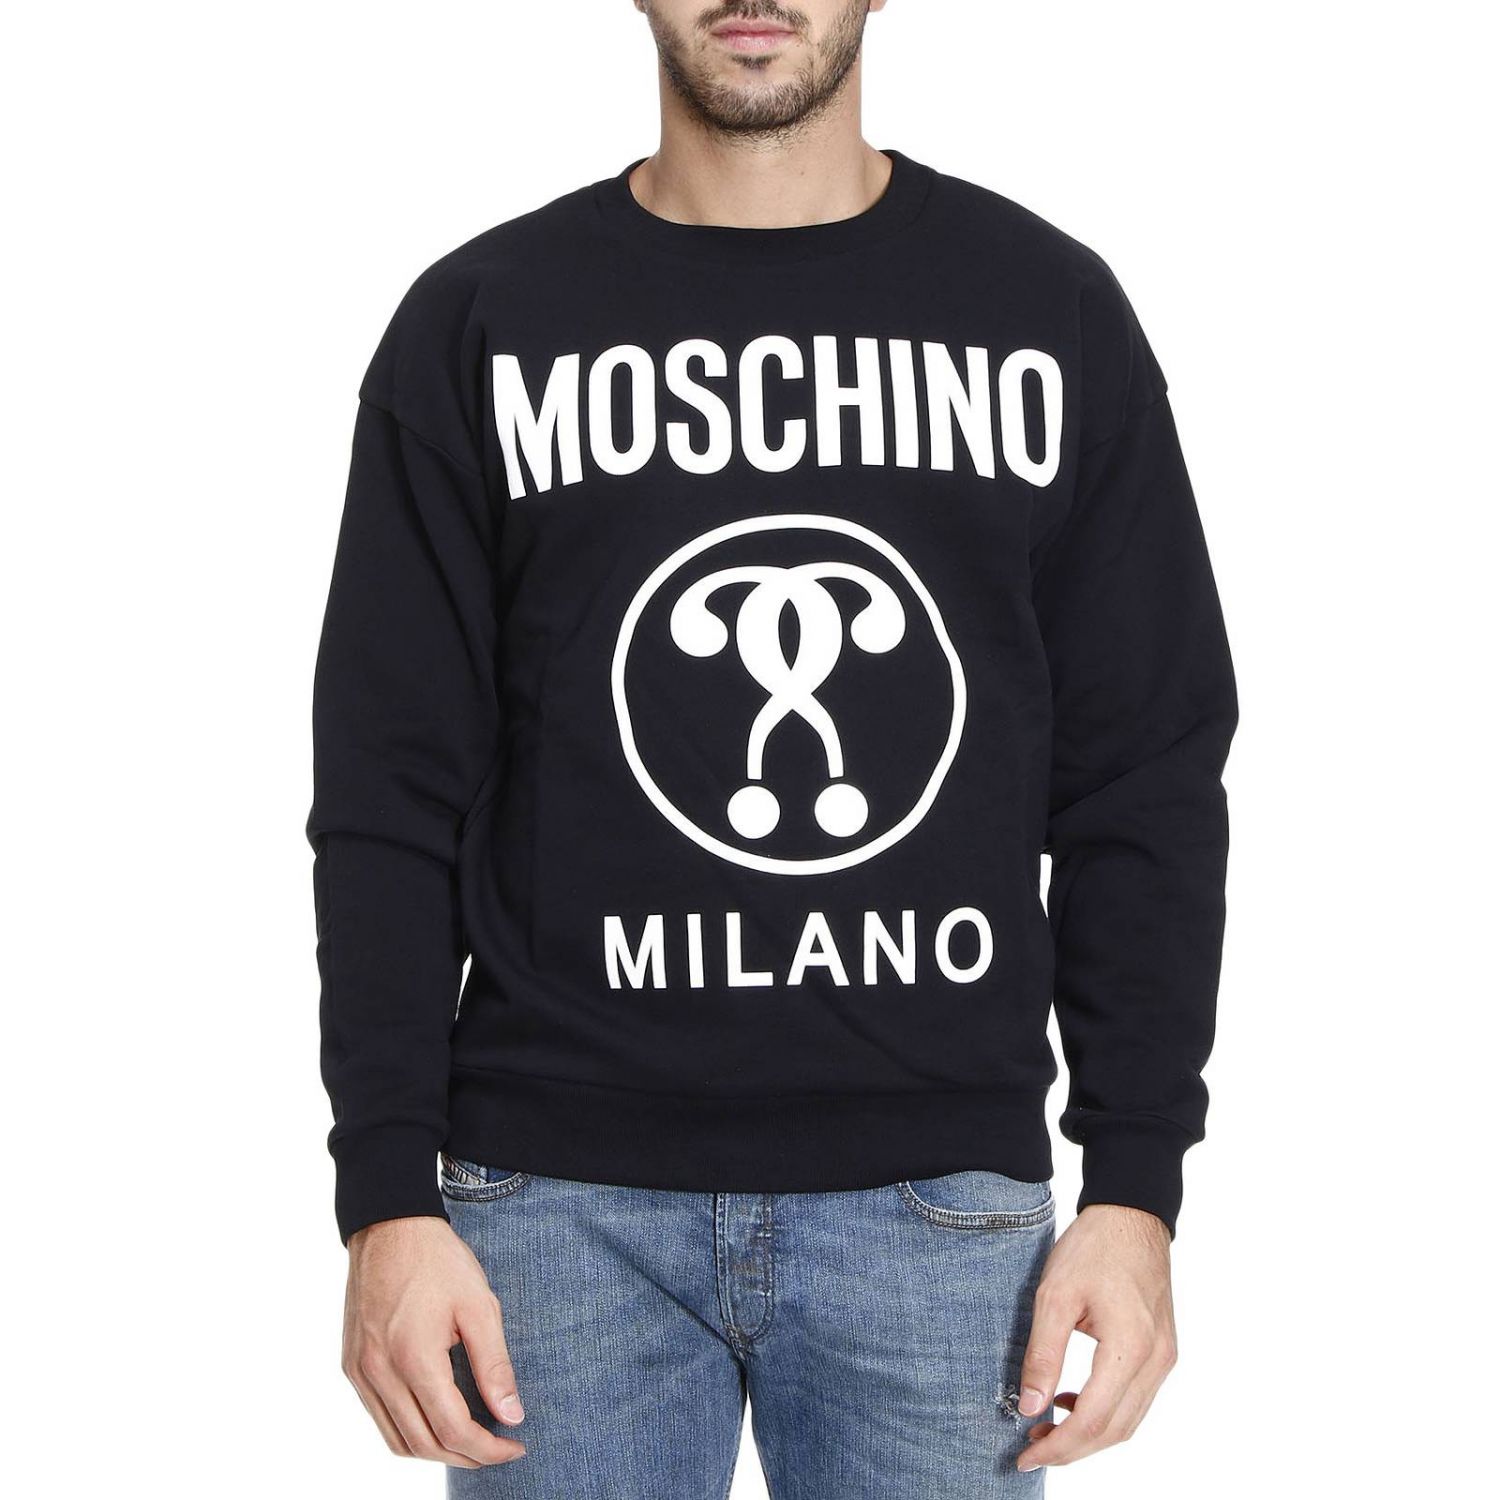 Moschino Couture Outlet: Sweater men | Sweatshirt Moschino Couture Men ...